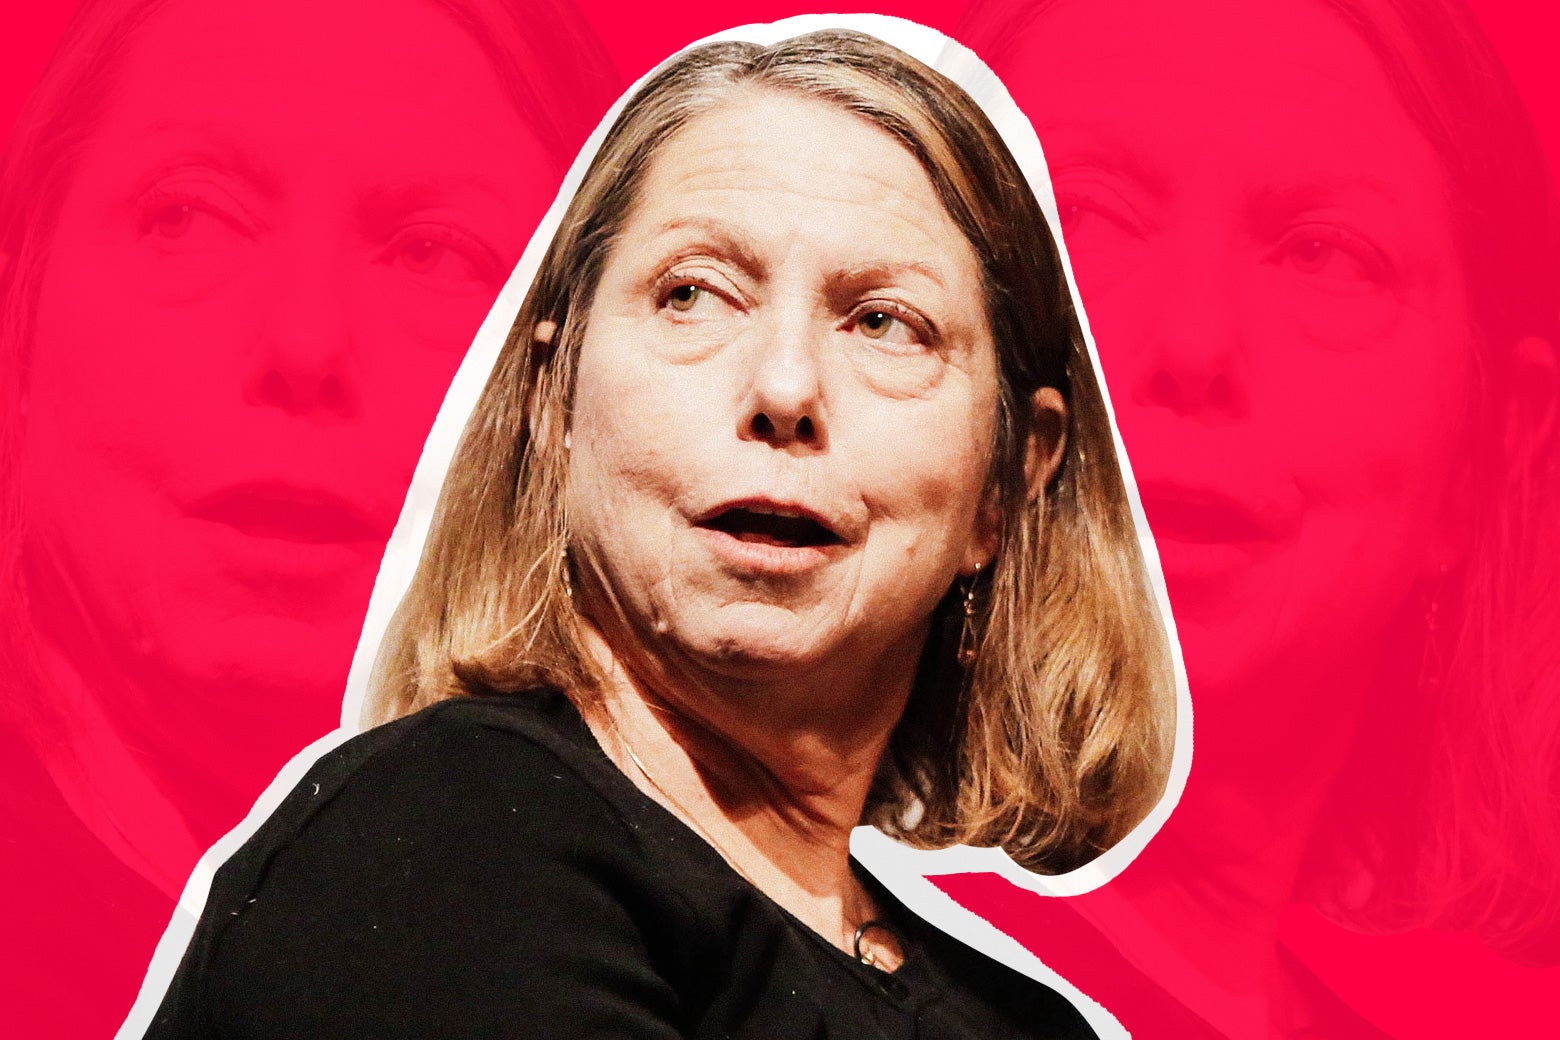 Jill Abramson on a pink background.